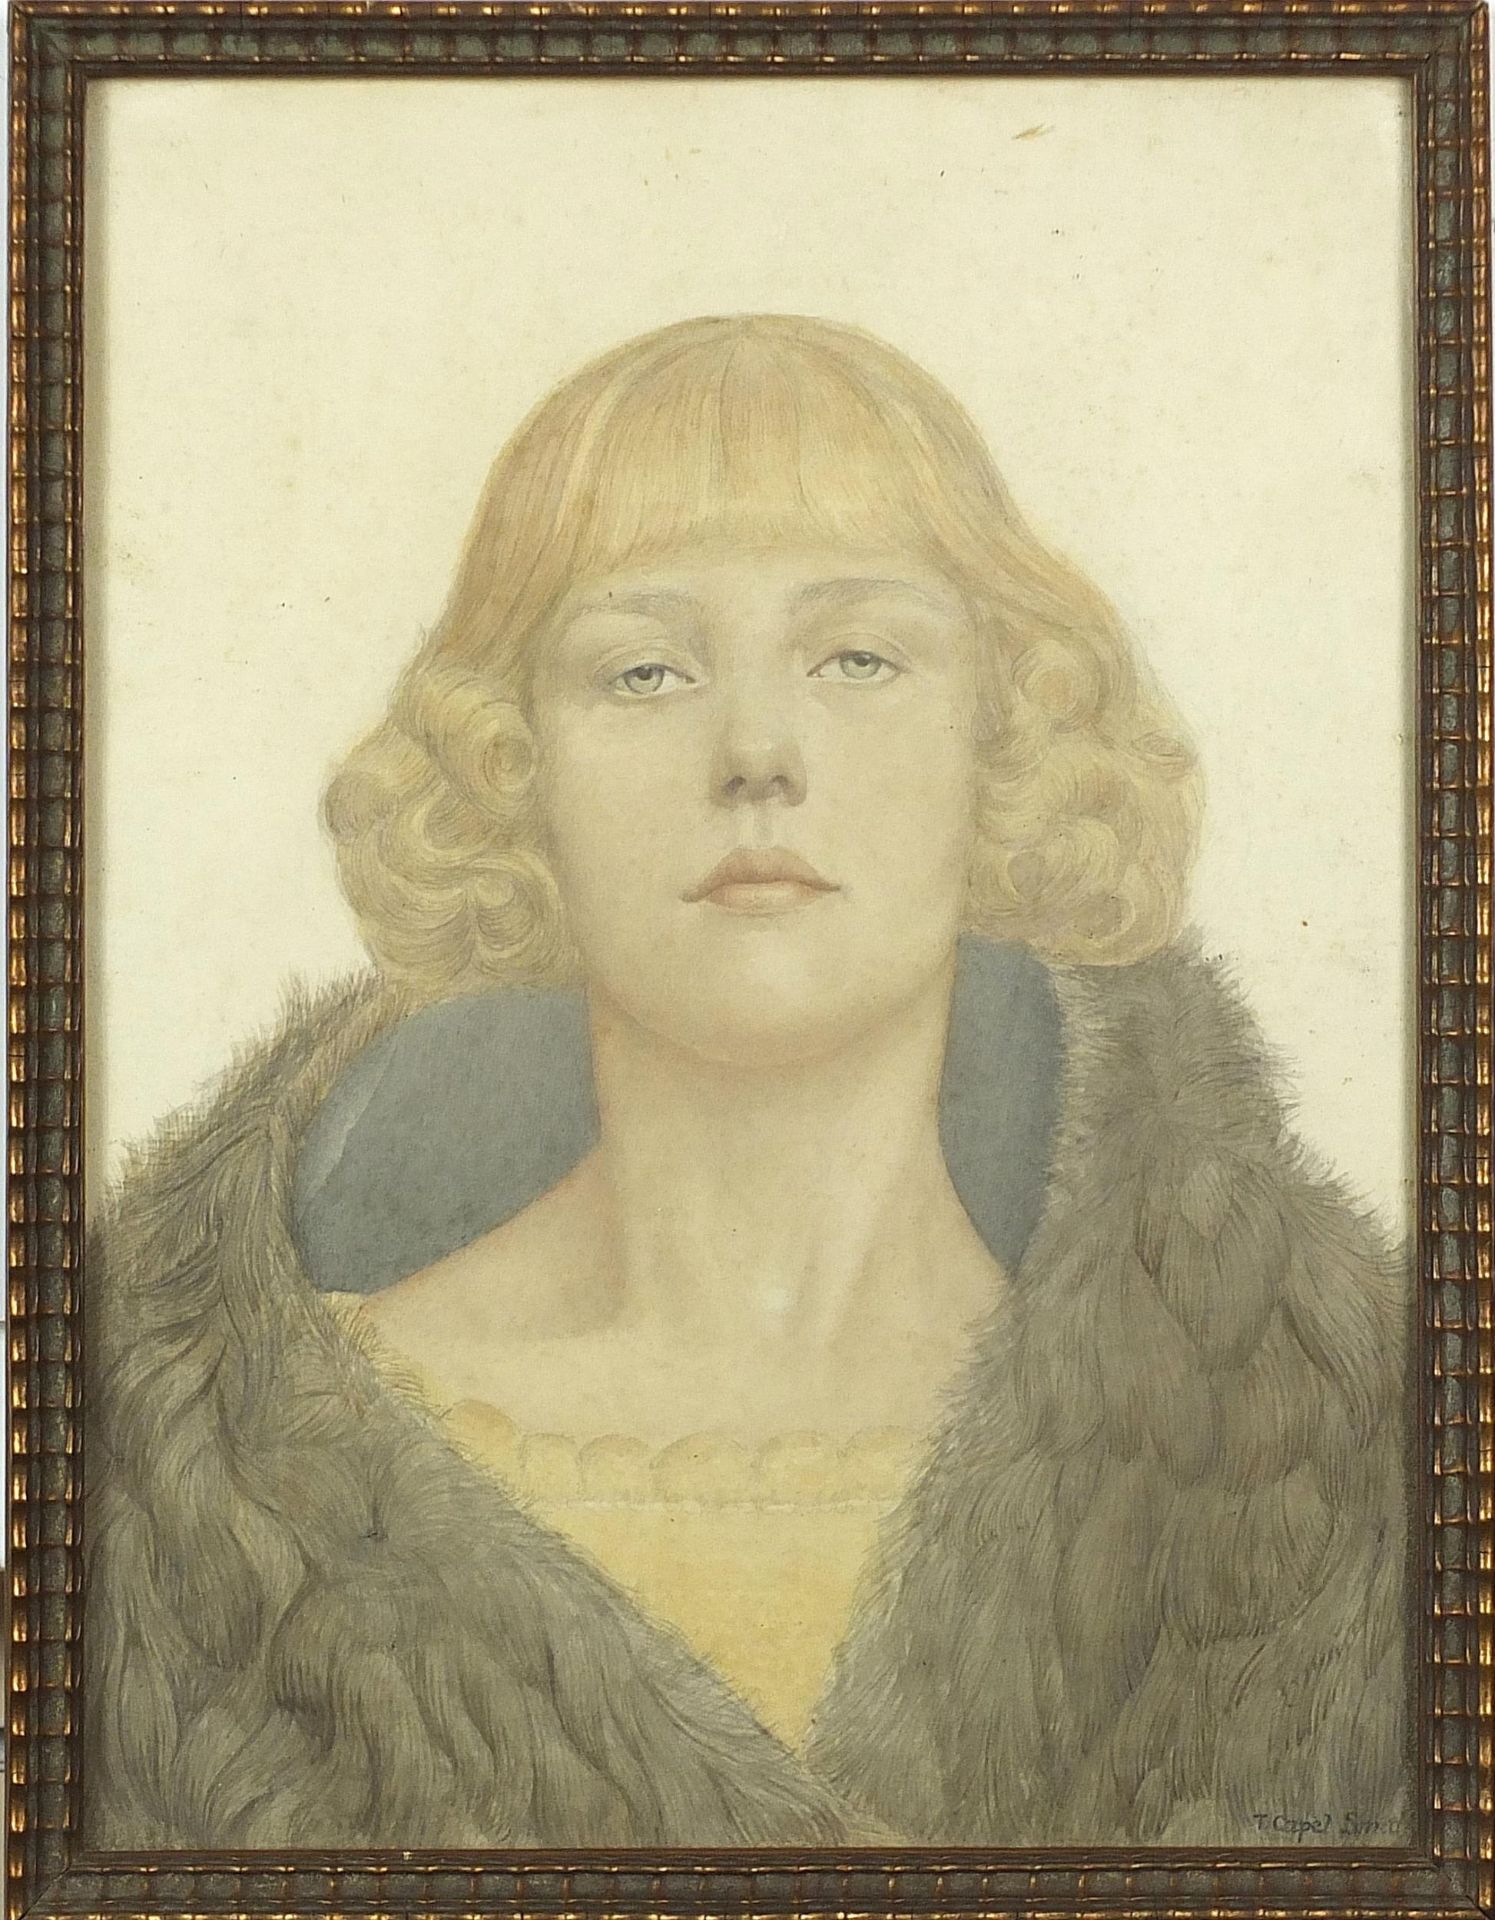 Thomas Capel Walton Smith - Head and shoulders portrait of an Art Nouveau female, early 20th century - Image 2 of 5